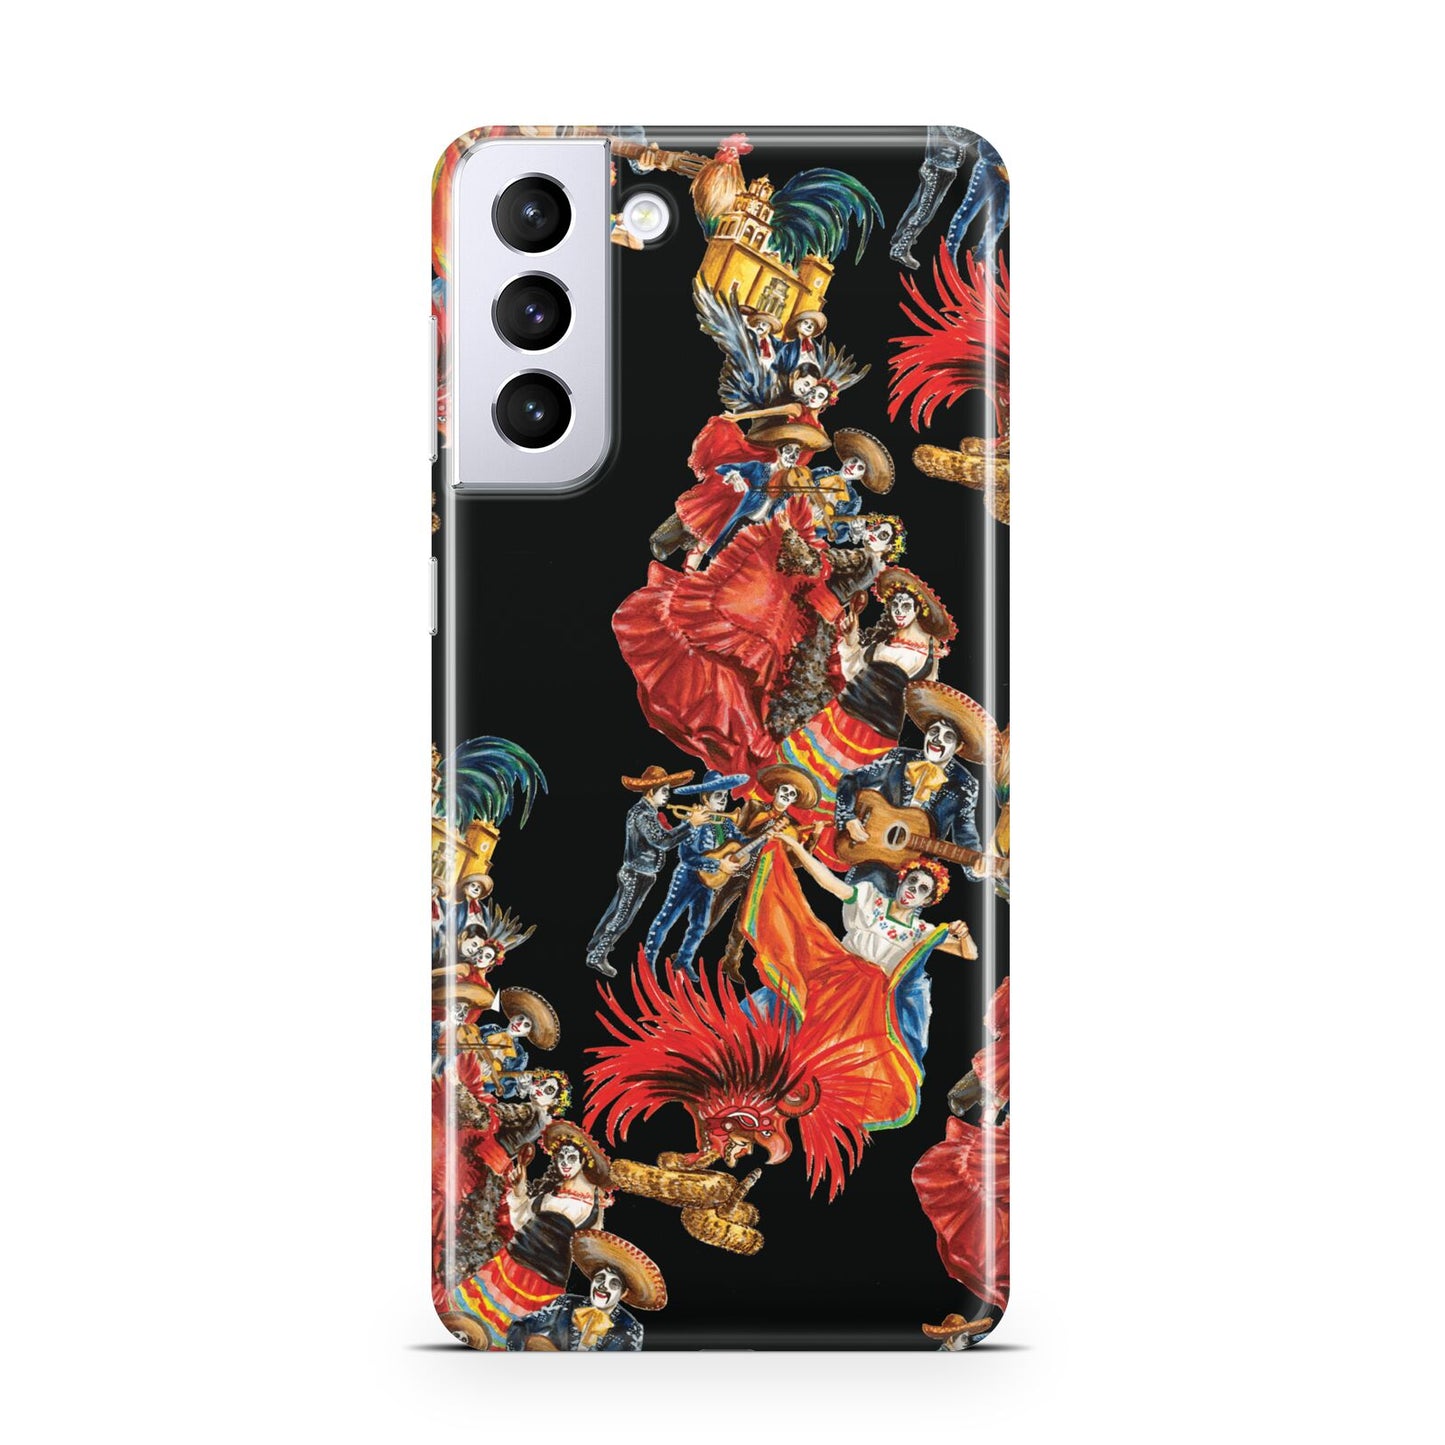 Day of the Dead Festival Samsung S21 Plus Phone Case